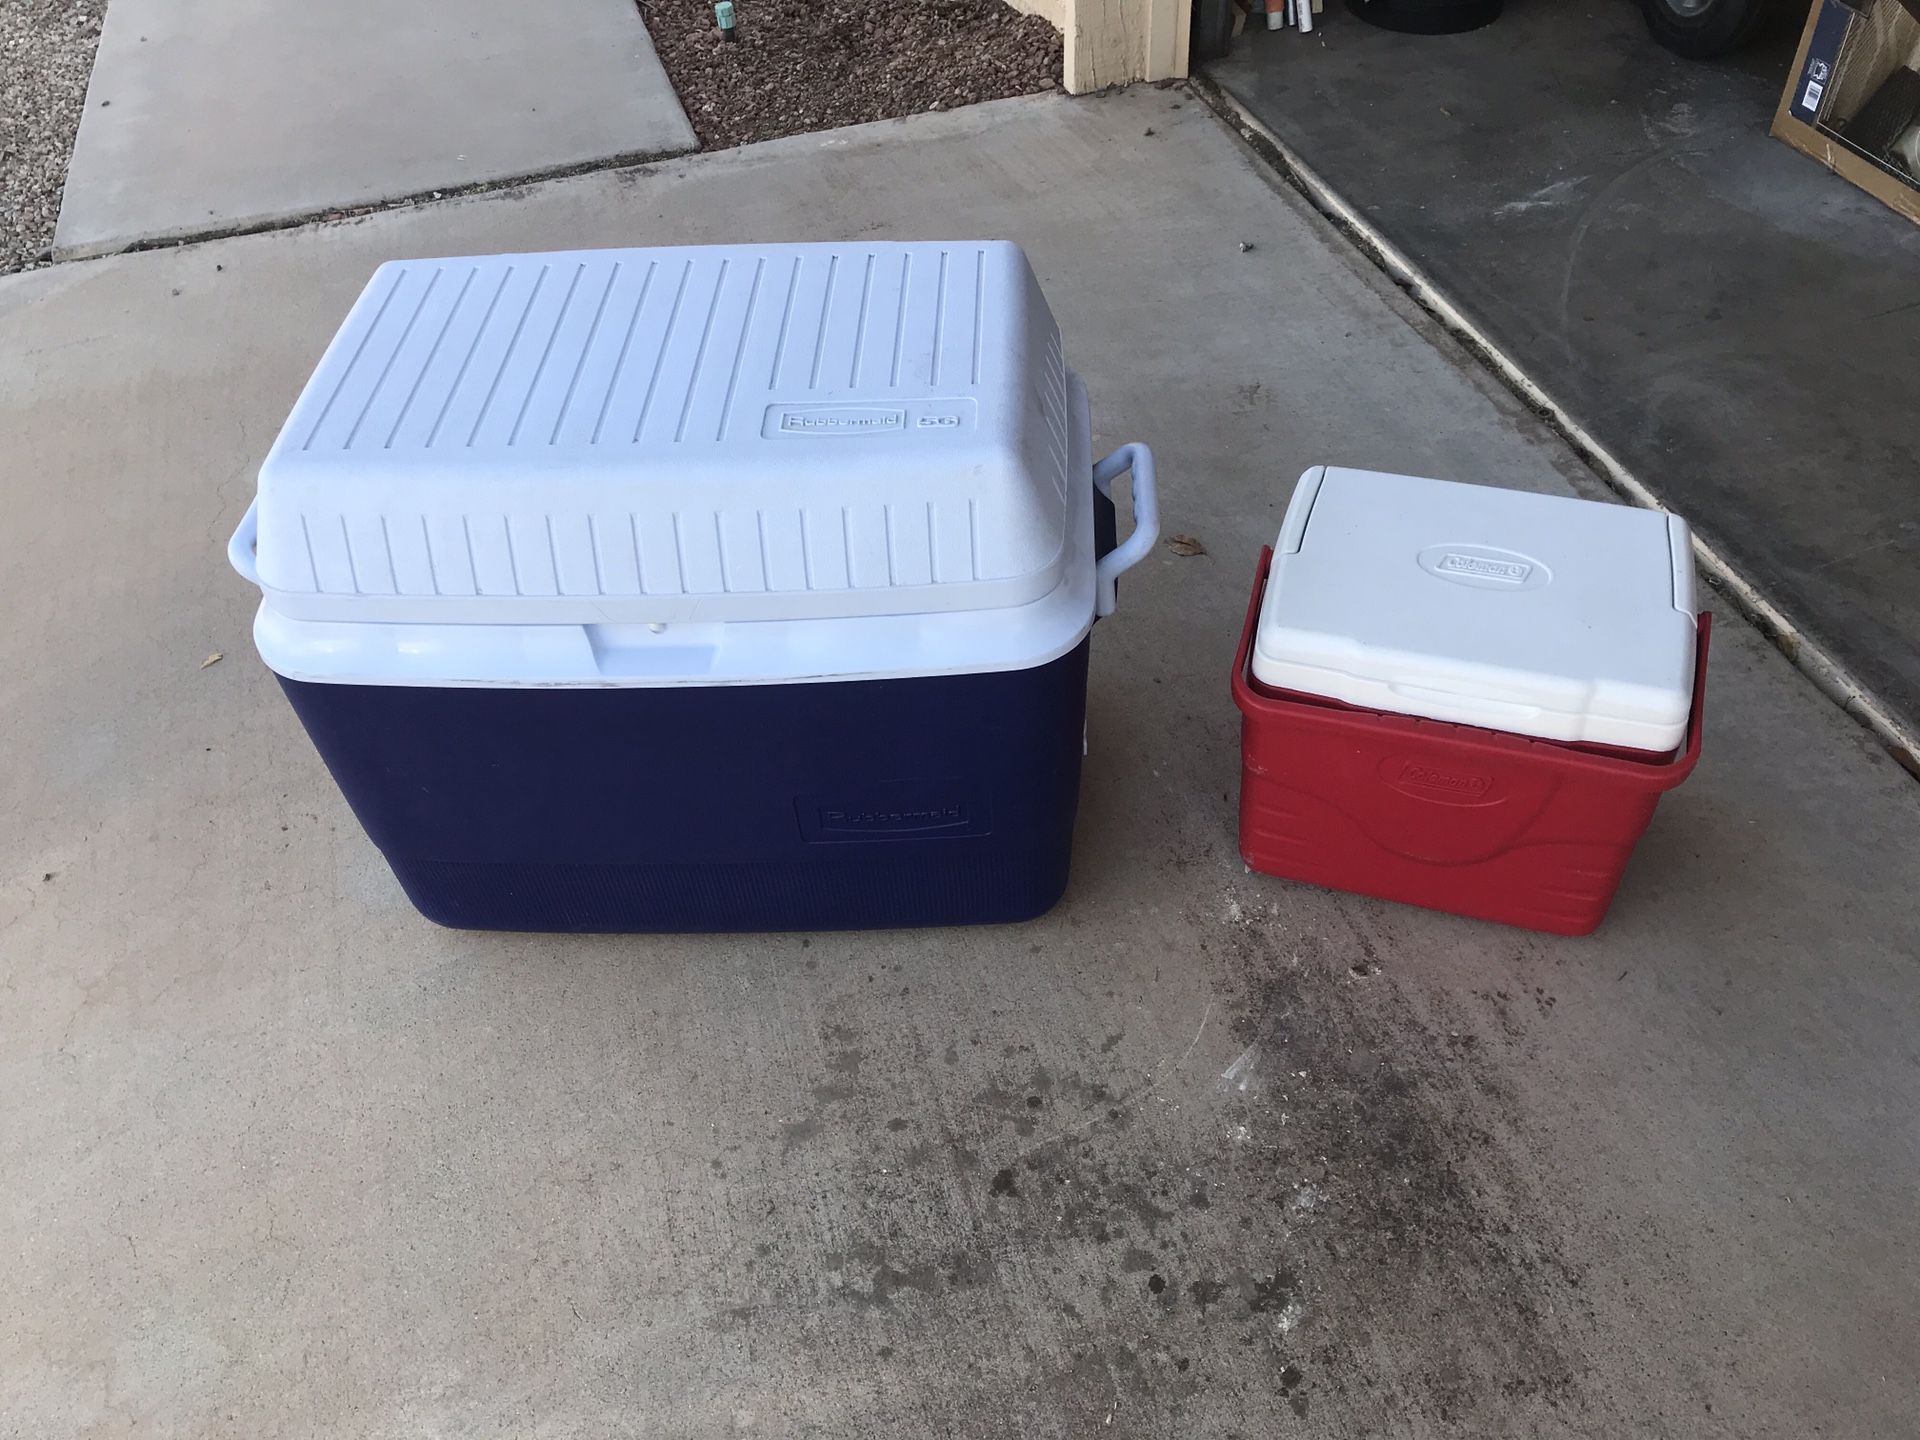 Two coolers